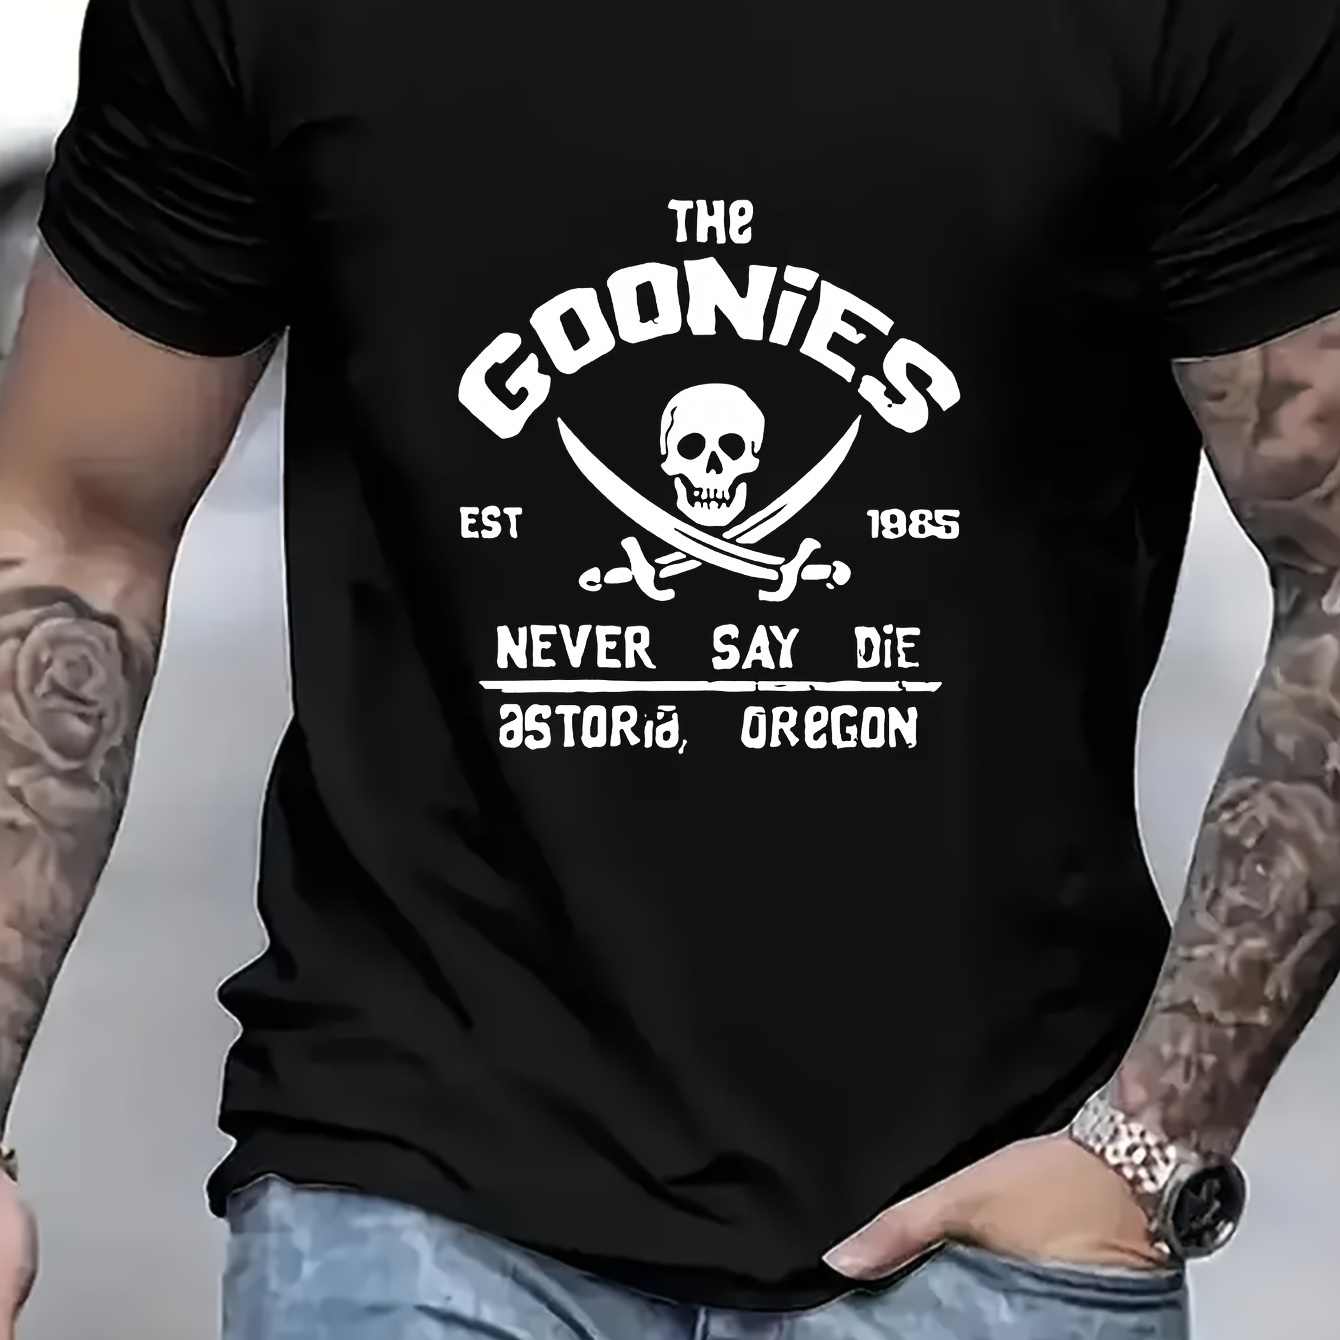 

Goonies Never Say Die Print T-shirt For Men, Comfortable & Stretchable, Summer Outdoor Activity, Streetwear Style, Crew Neck Top, Casual Pattern Tee For Gift, Summer Apparel Casual Fit